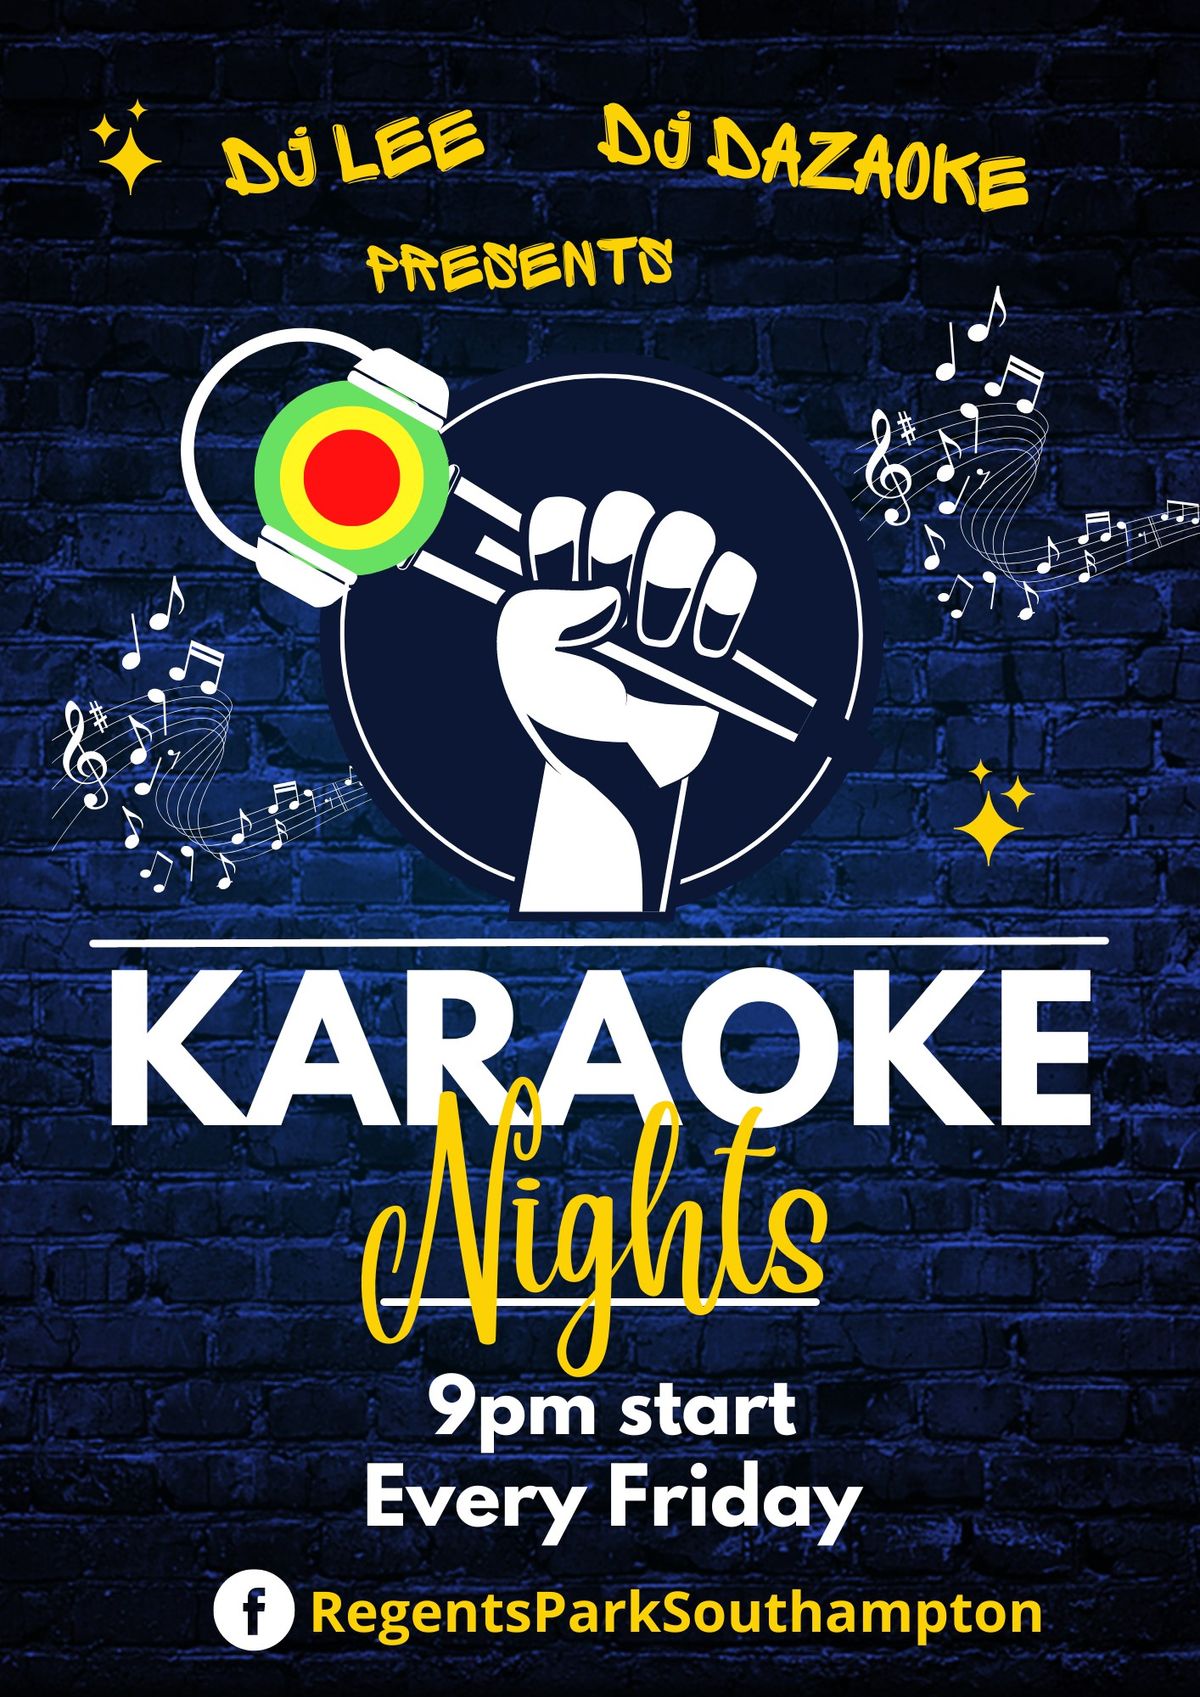 KARAOKE NIGHTS AT THE REGENTS | EVERY FRIDAY 